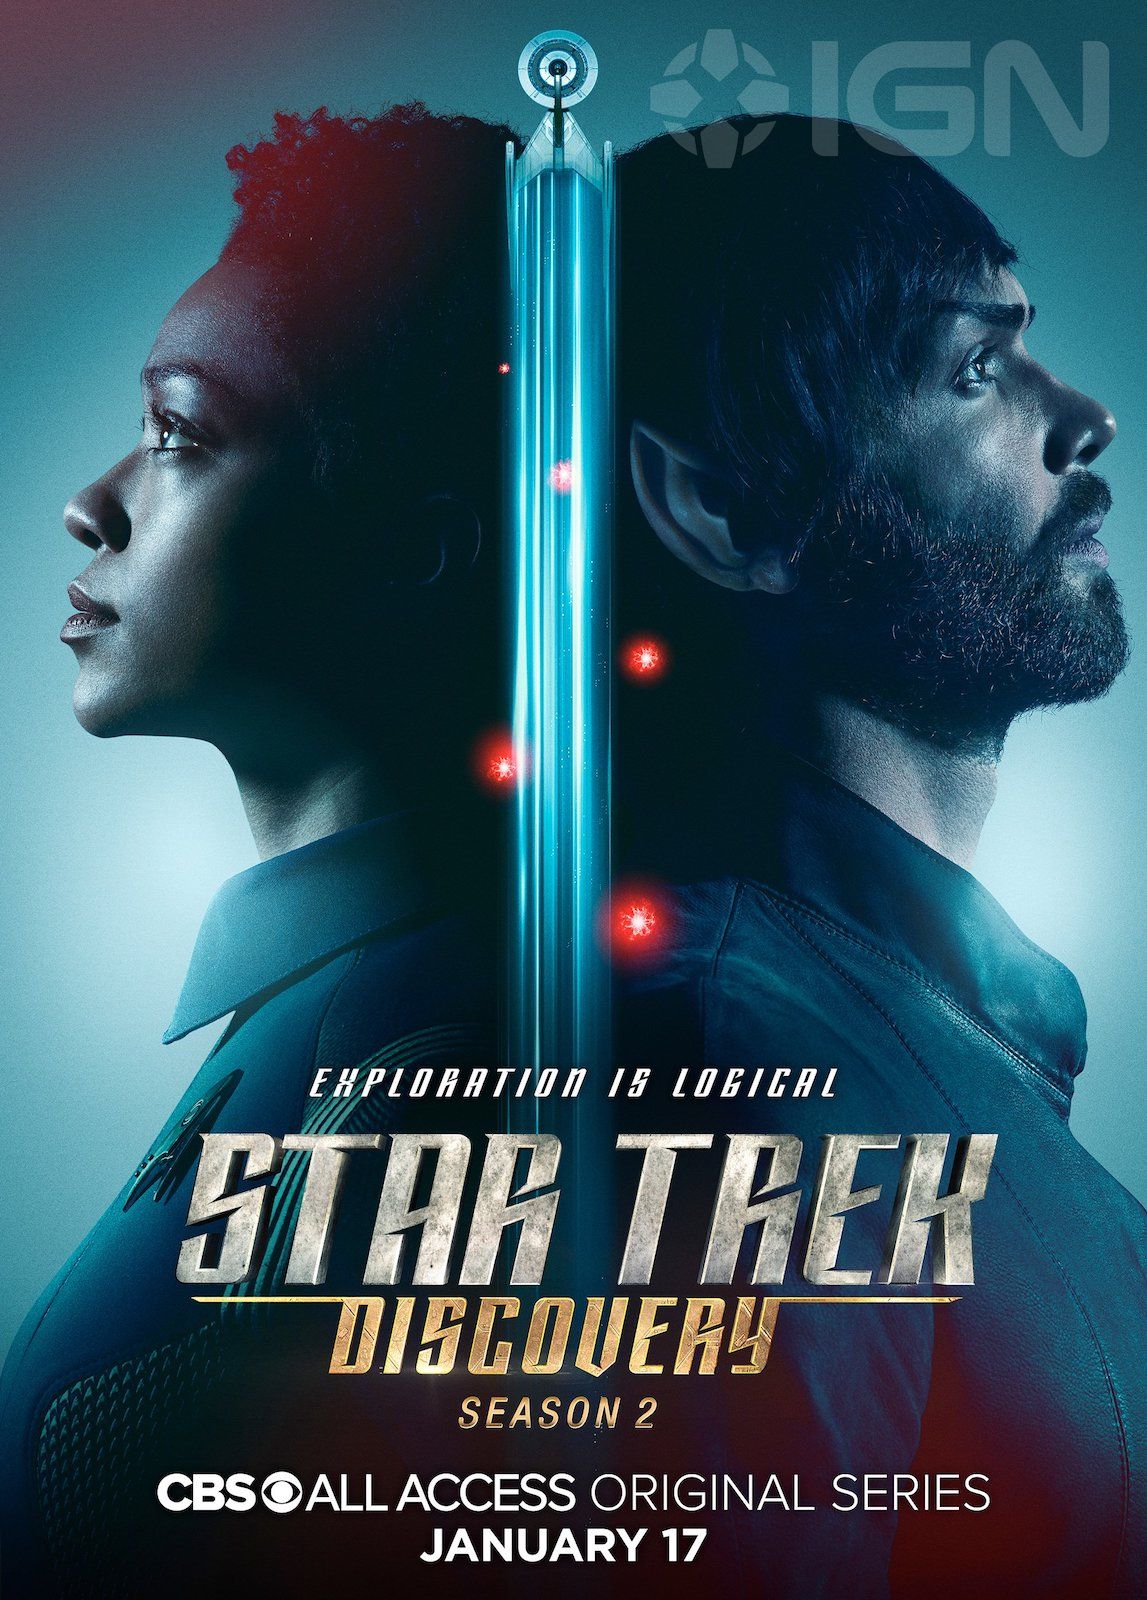 New 'Star Trek: Discovery' Season Two Posters and Cast Image, First Episode Gets A Title